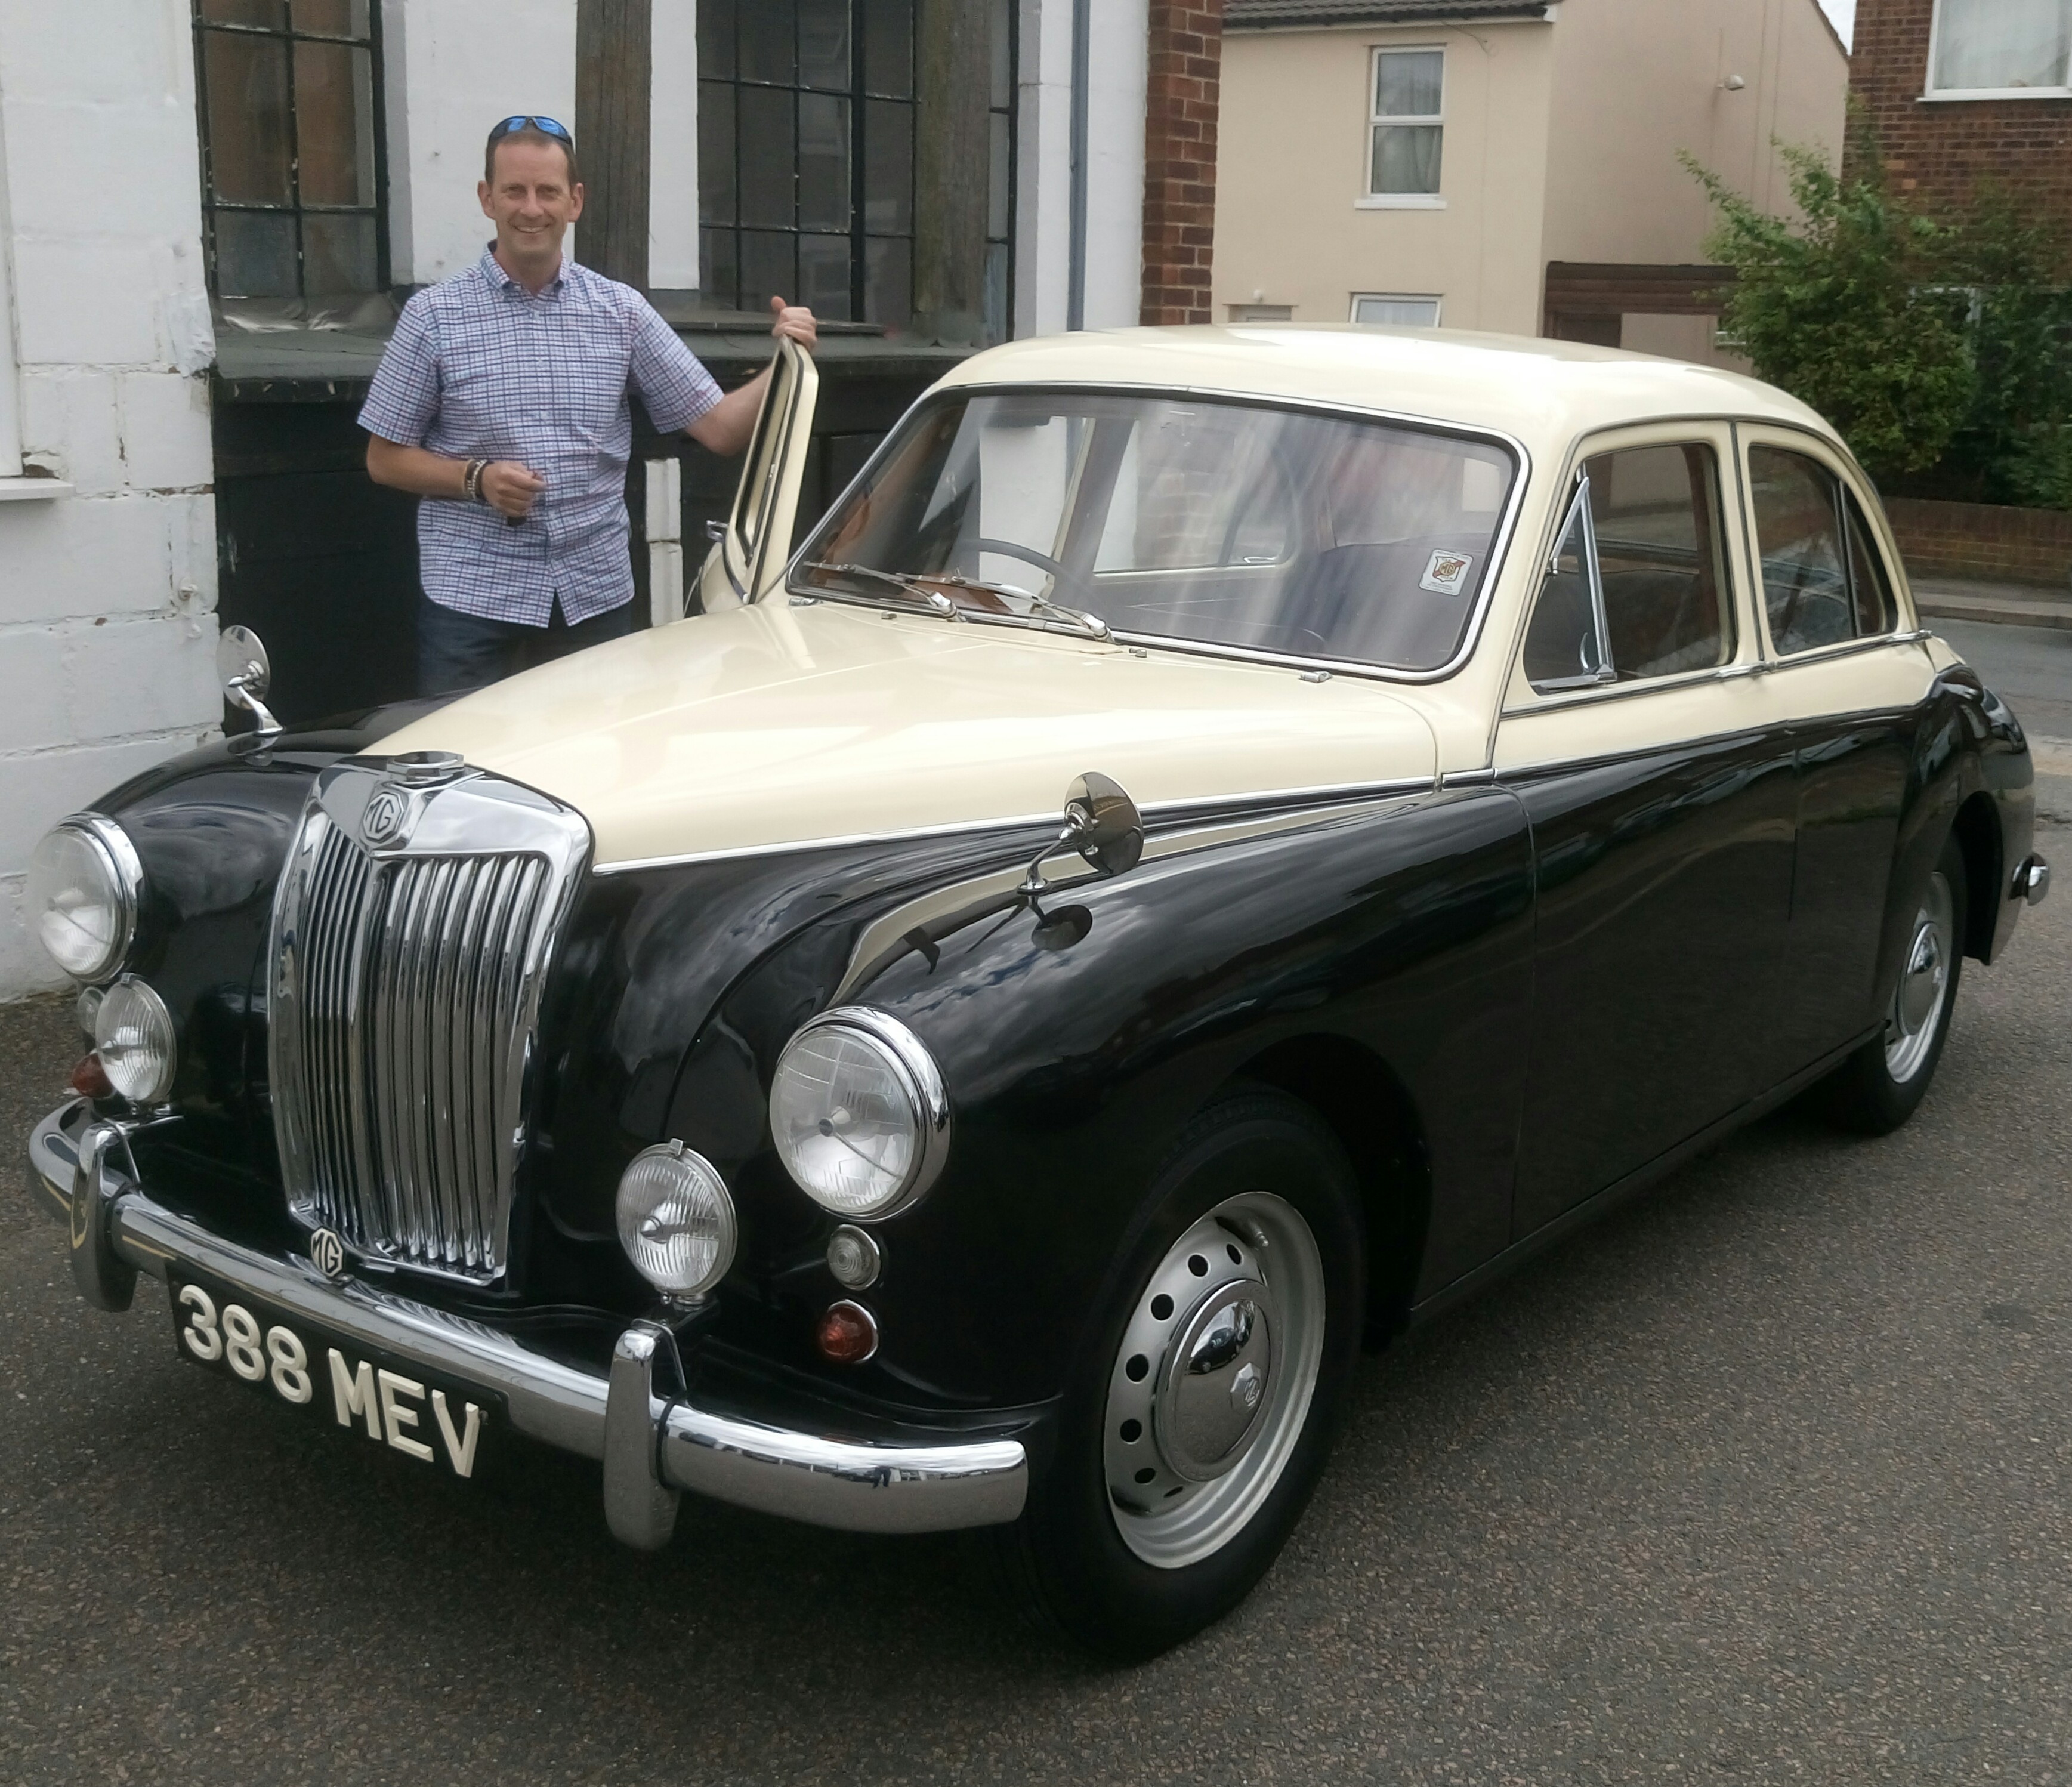 Mr Gladwin Collecting His MG Magnette